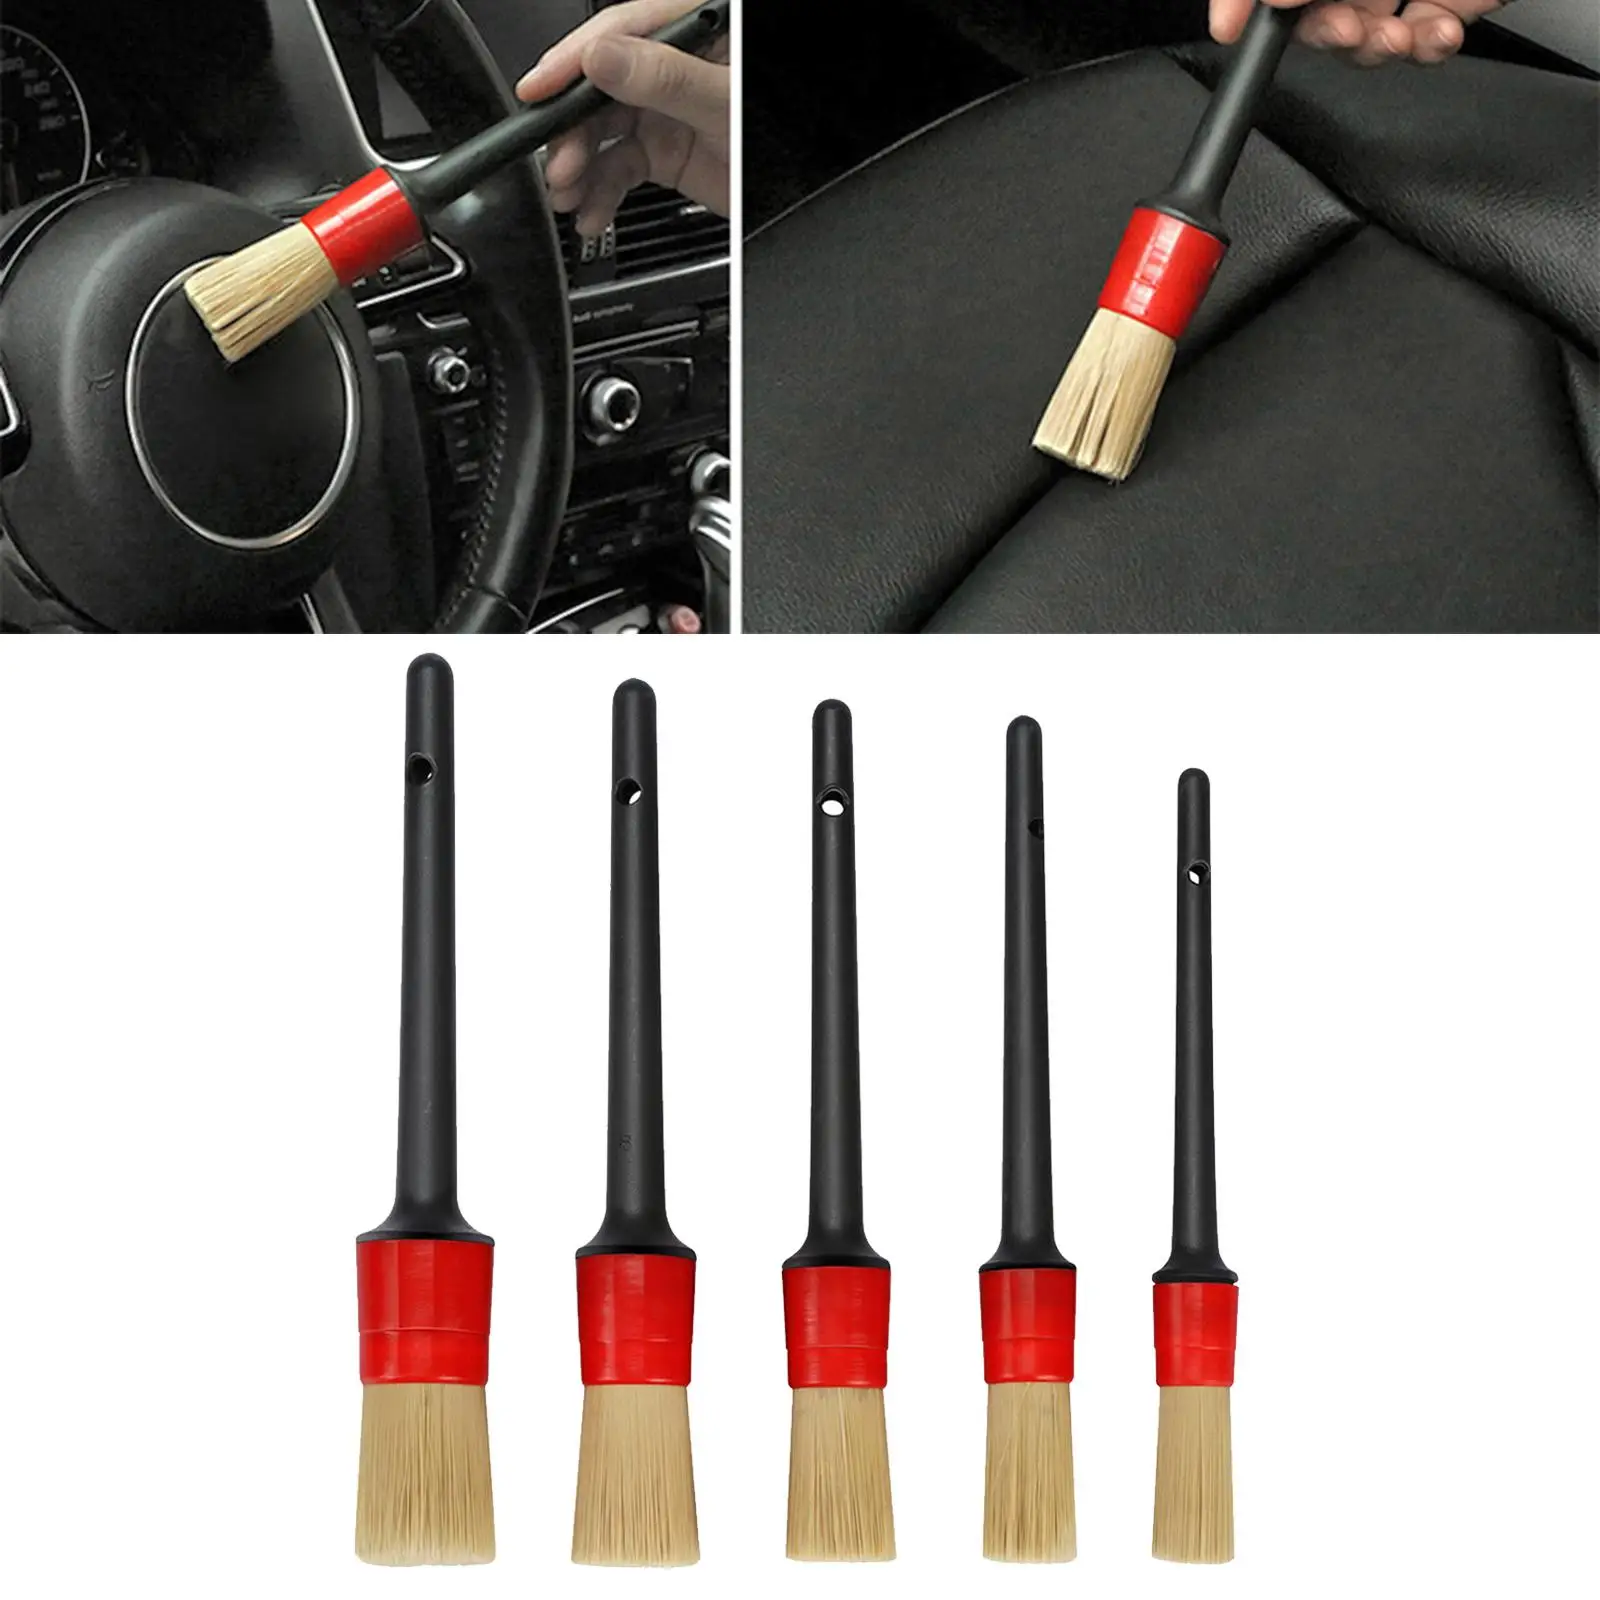 5x Car Interior Detailing Brush Set for Cleaning Engine Air Vent